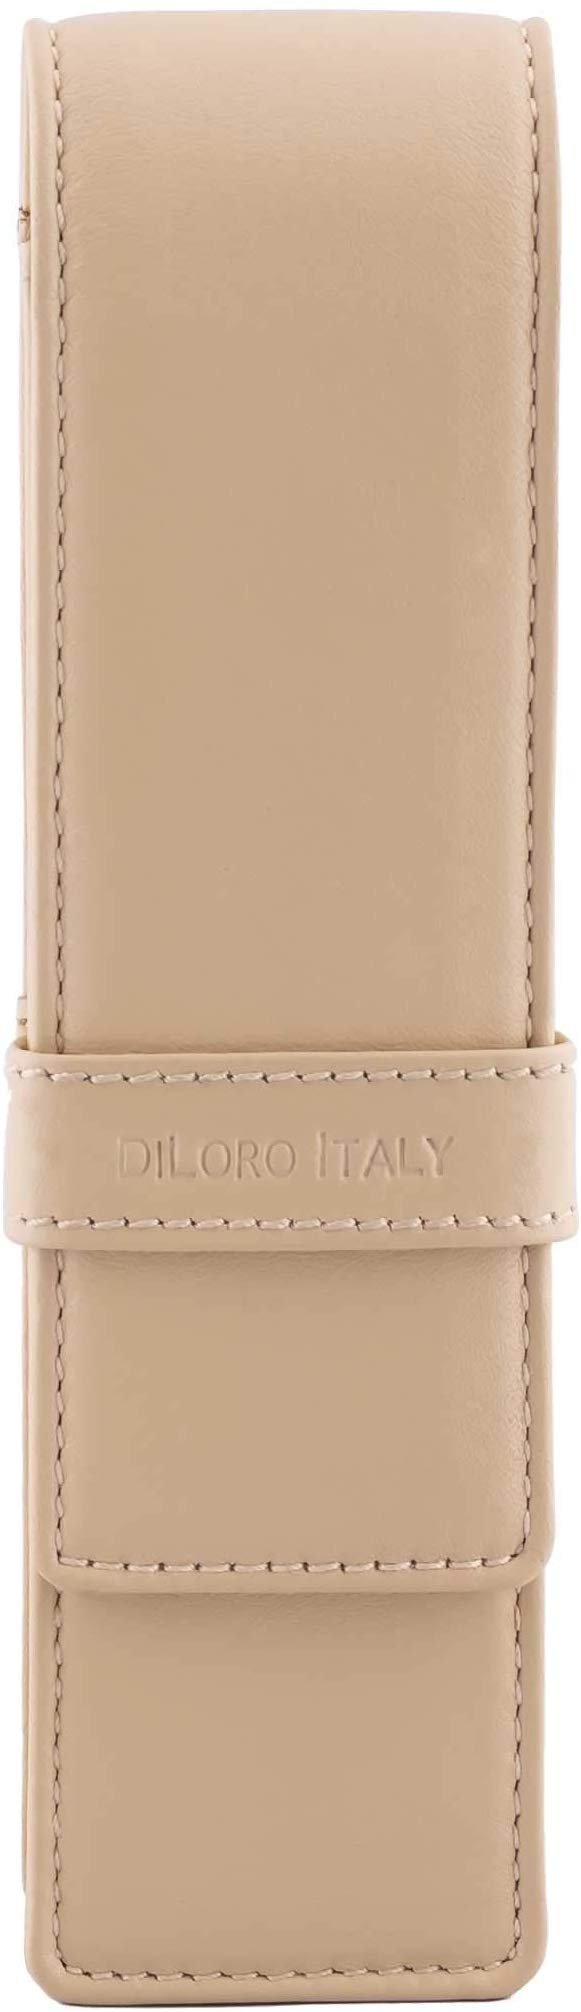 DiLoro Leather Pen Case Pouch Holder for Two Fountain Pens Ballpoint Rollerball Pen or Pencils (Beige)